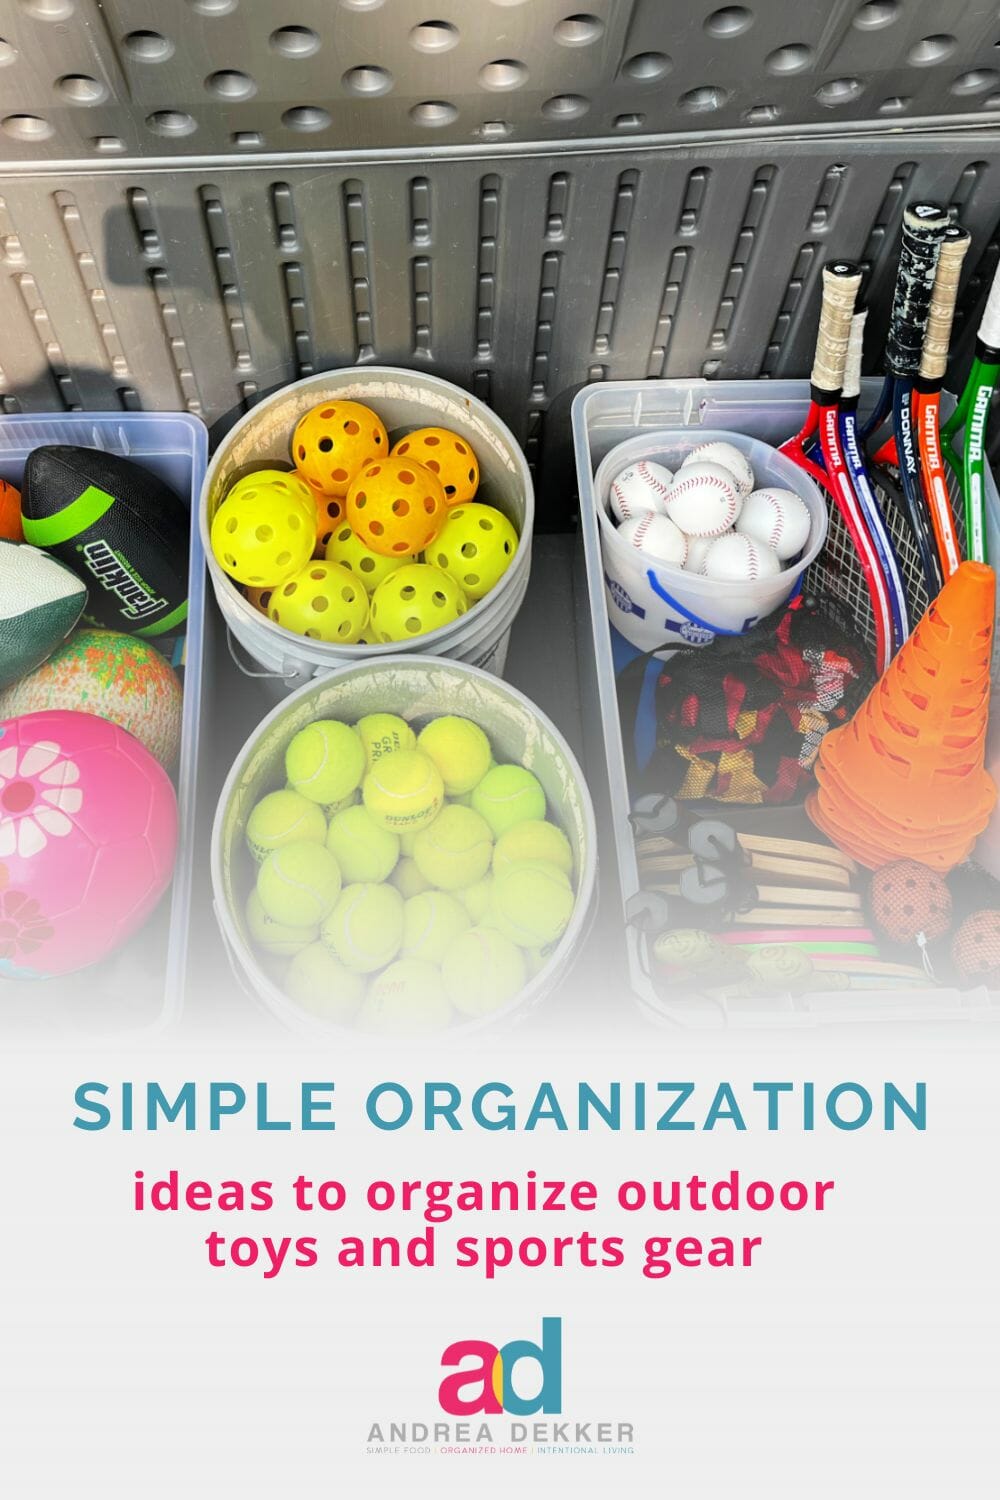 Get motivated to organize your outdoor toys and sports gear with easy ideas and practical tips you can implement today! via @andreadekker